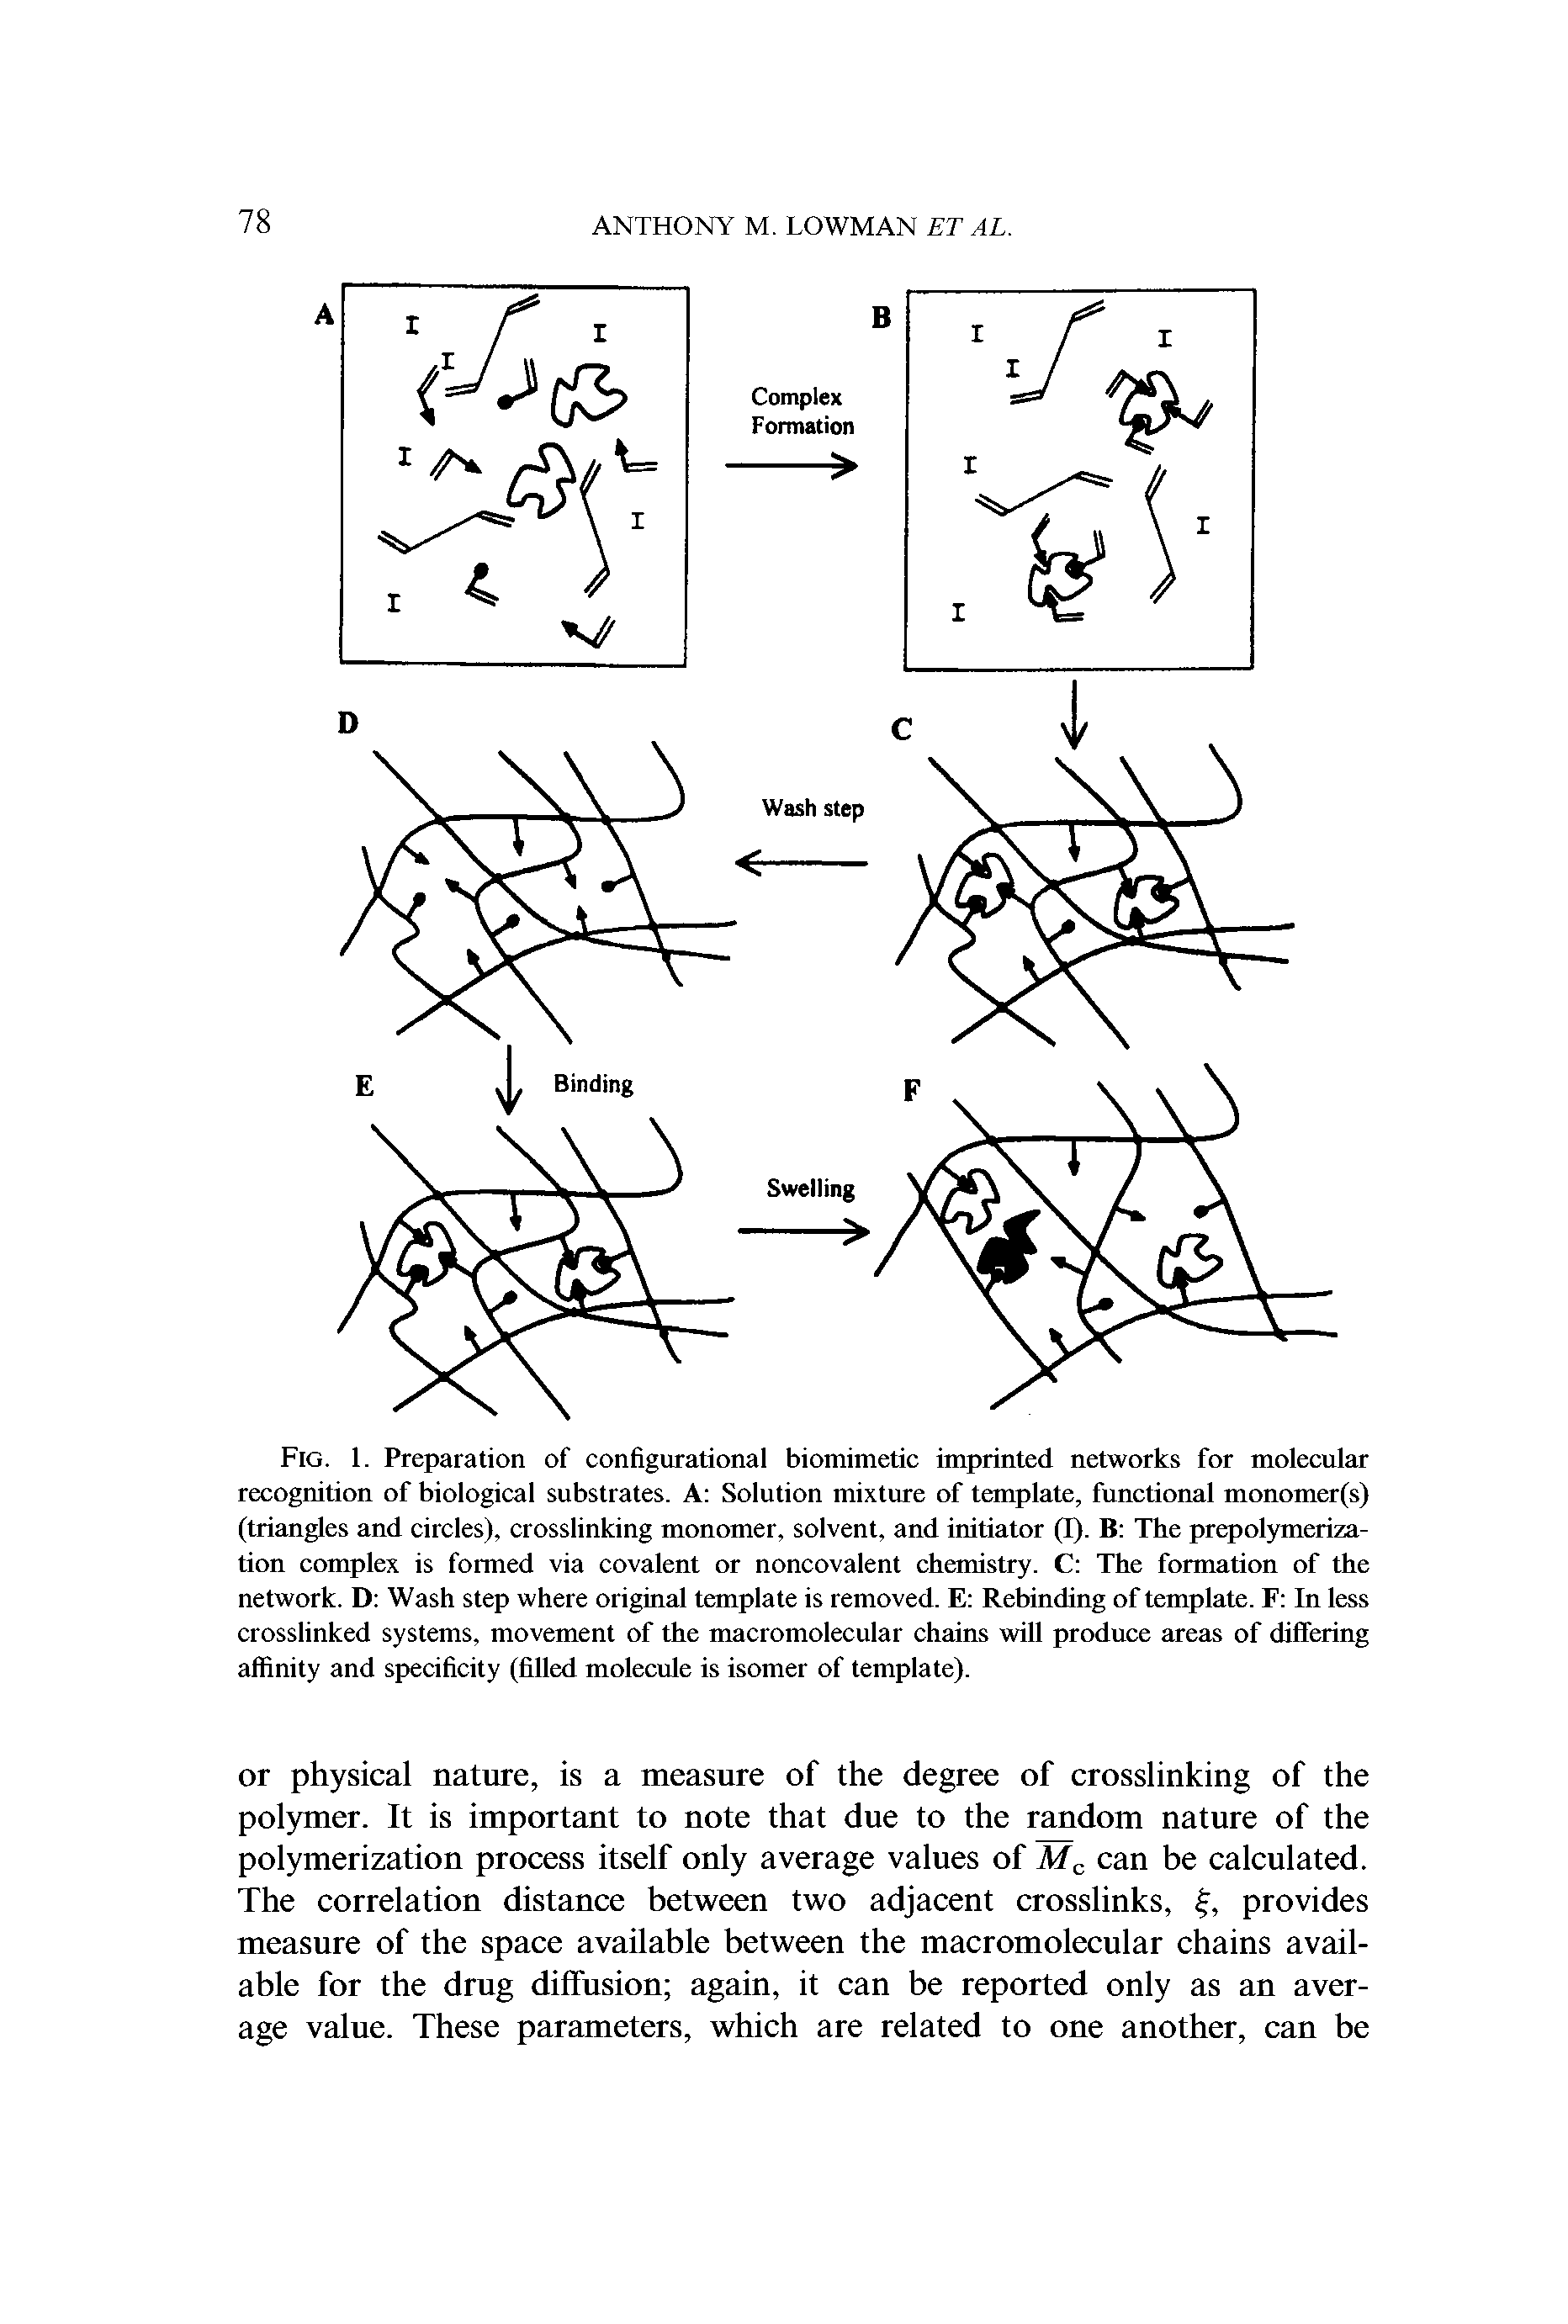 Fig. 1. Preparation of configurational biomimetic imprinted networks for molecular recognition of biological substrates. A Solution mixture of template, functional monomer(s) (triangles and circles), crosslinking monomer, solvent, and initiator (I). B The prepolymerization complex is formed via covalent or noncovalent chemistry. C The formation of the network. D Wash step where original template is removed. E Rebinding of template. F In less crosslinked systems, movement of the macromolecular chains will produce areas of differing affinity and specificity (filled molecule is isomer of template).